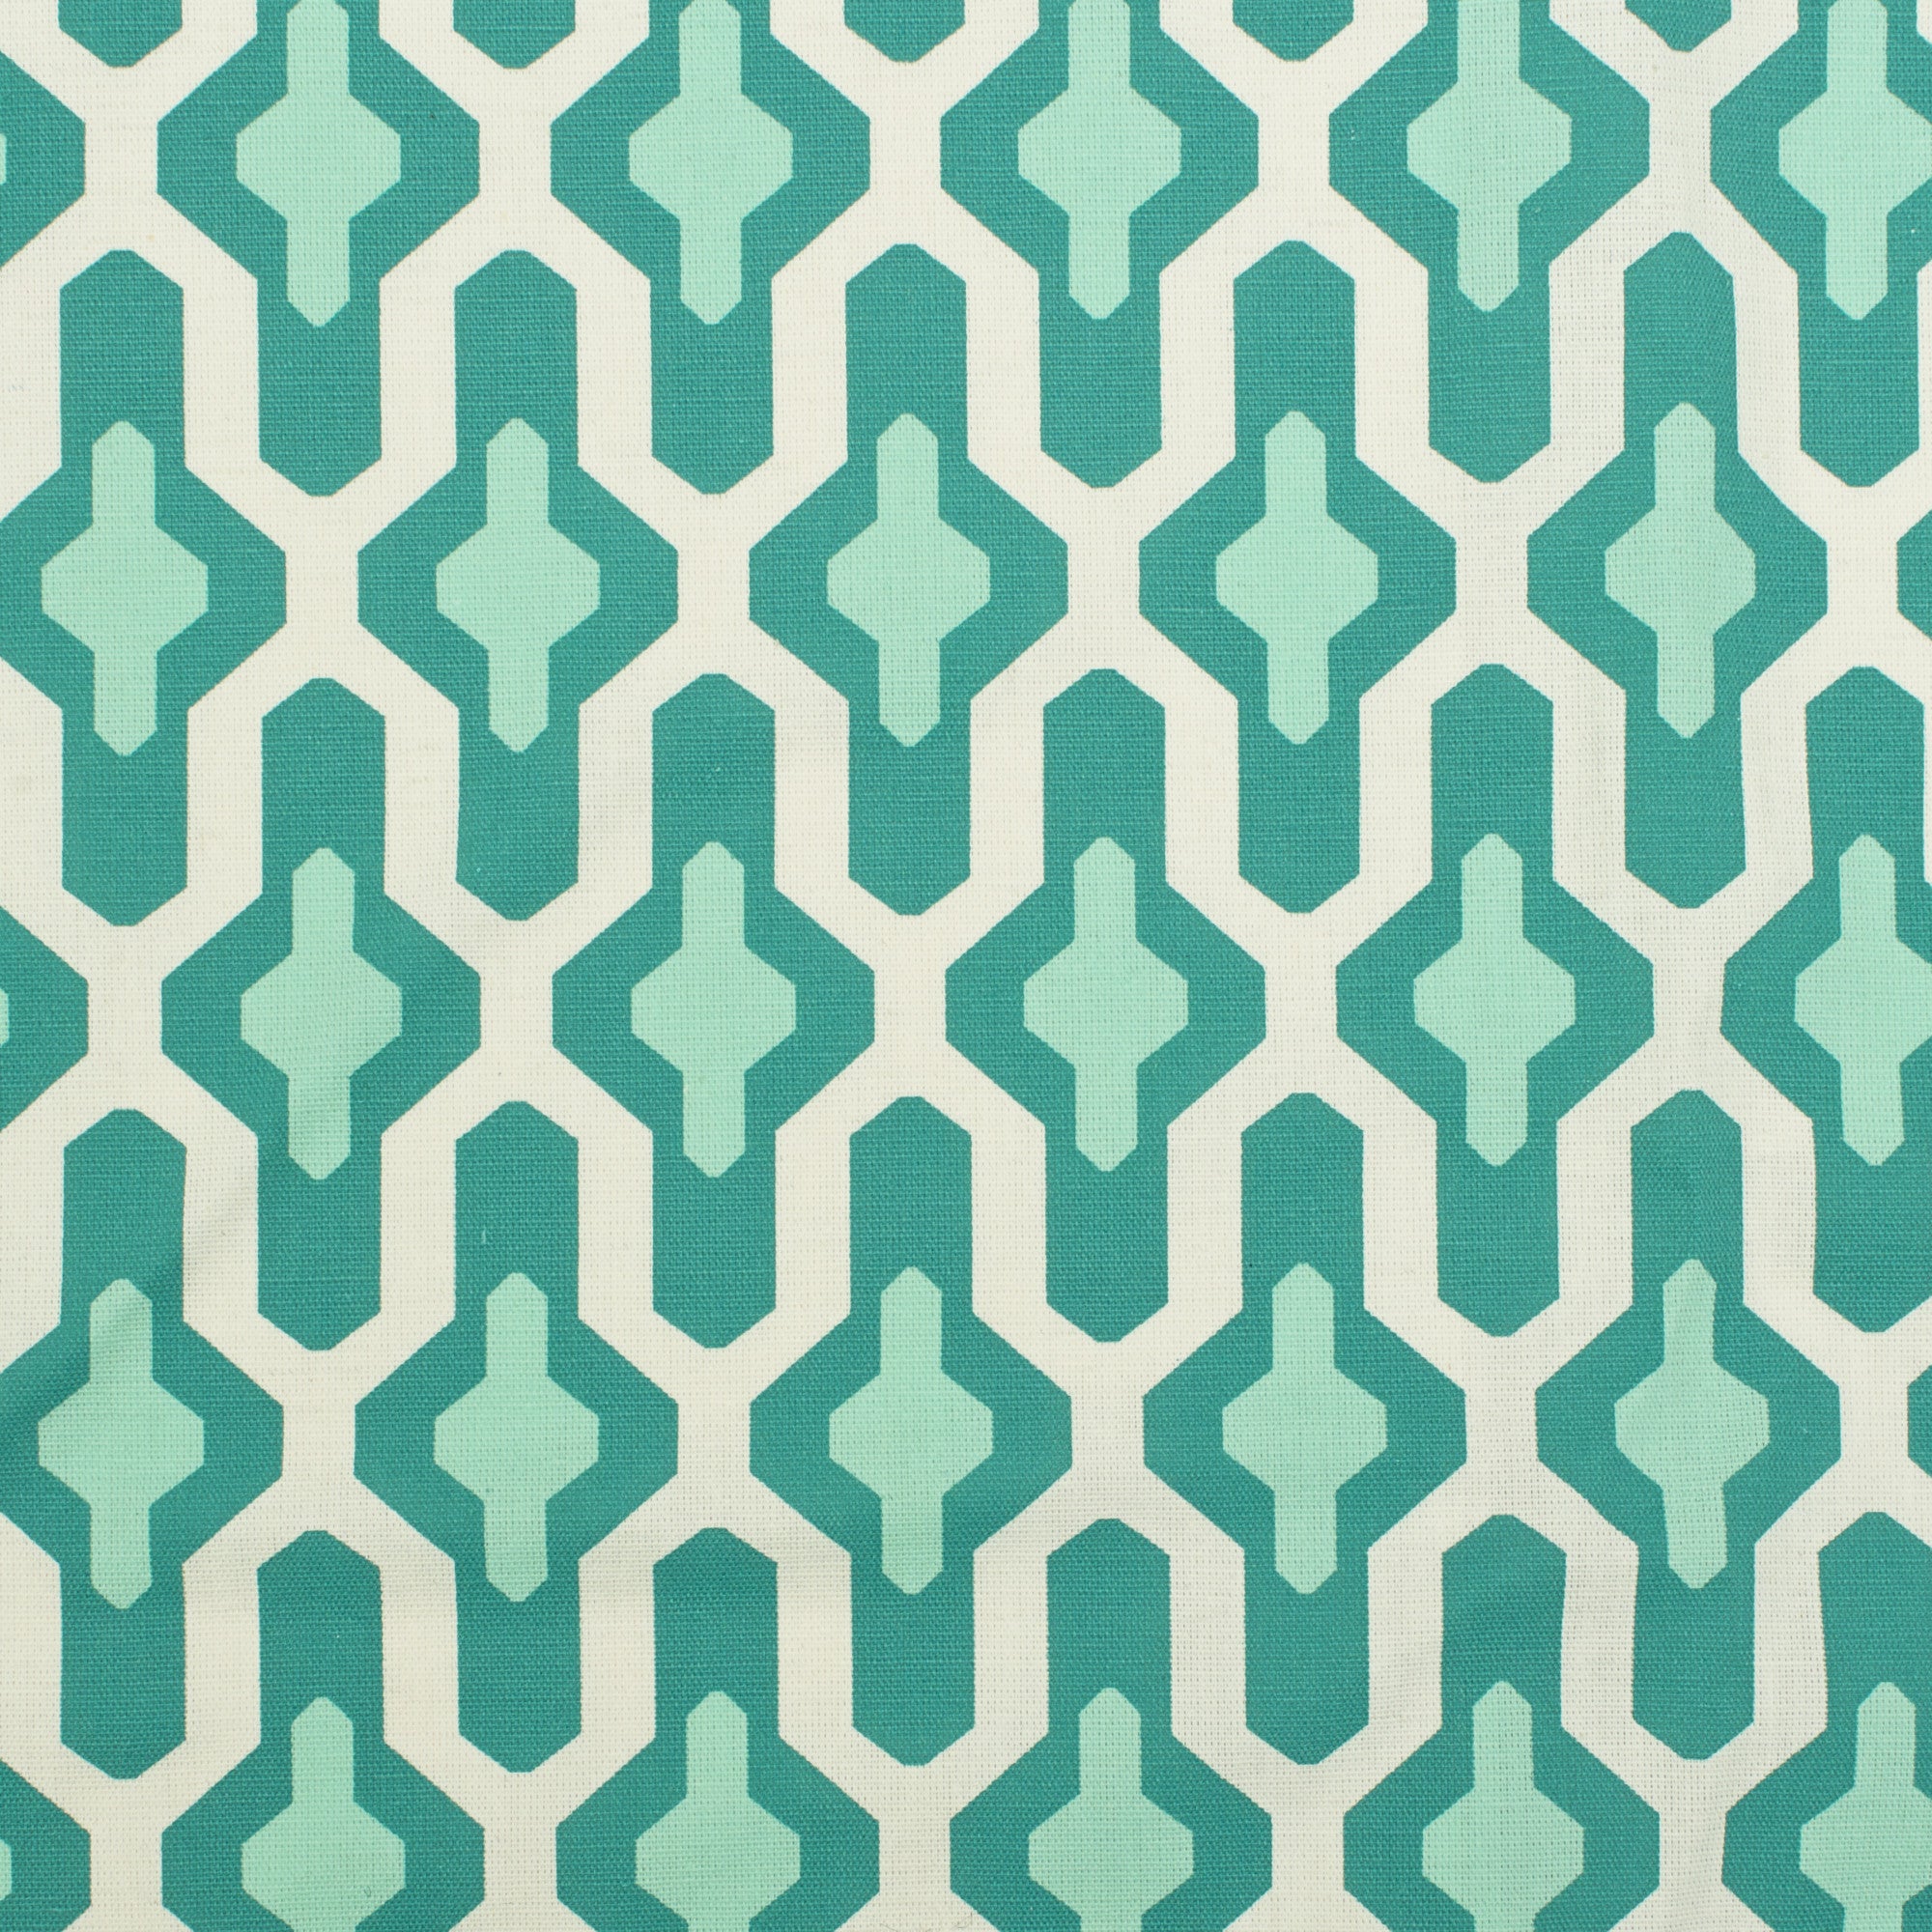 LR Resources DRAPES AND CURTAINS 17014 Teal